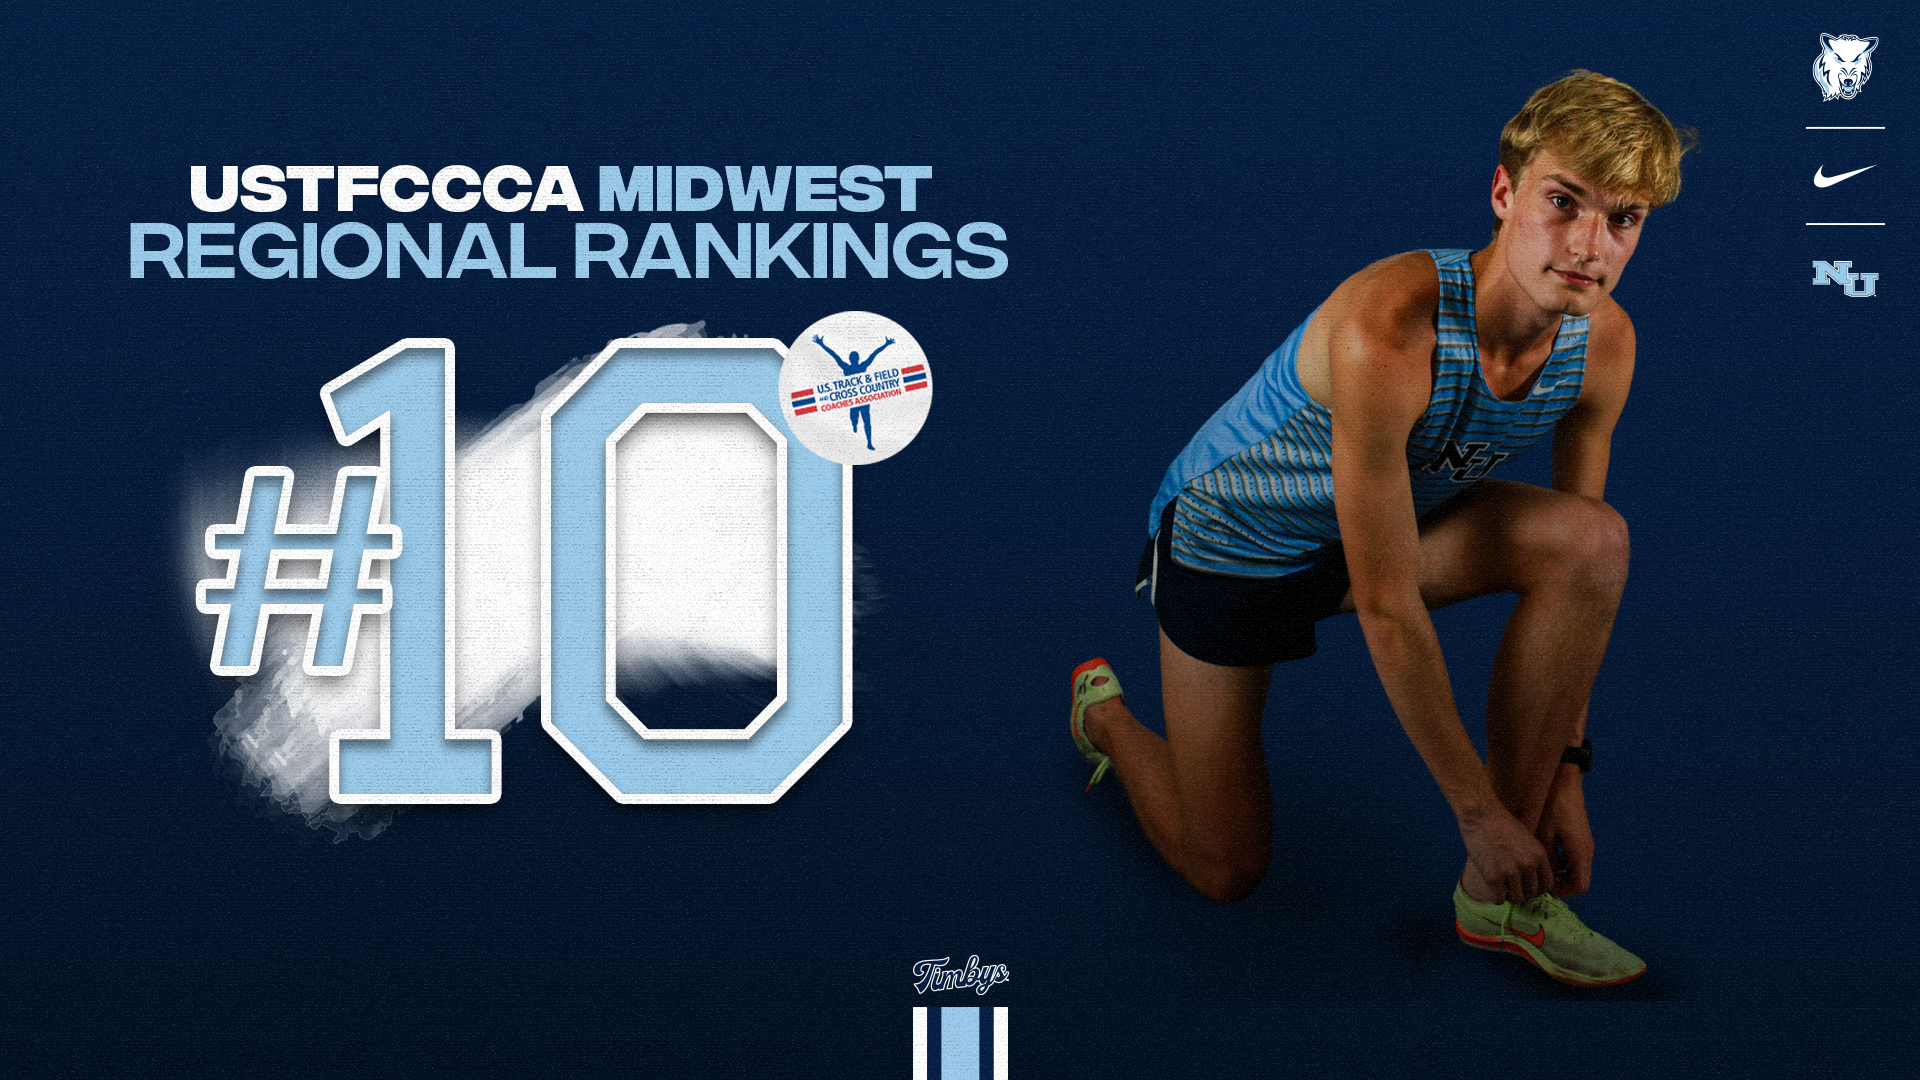 Men's Cross Country Appears At No. 10 In Latest USTFCCCA Midwest Regional Rankings.